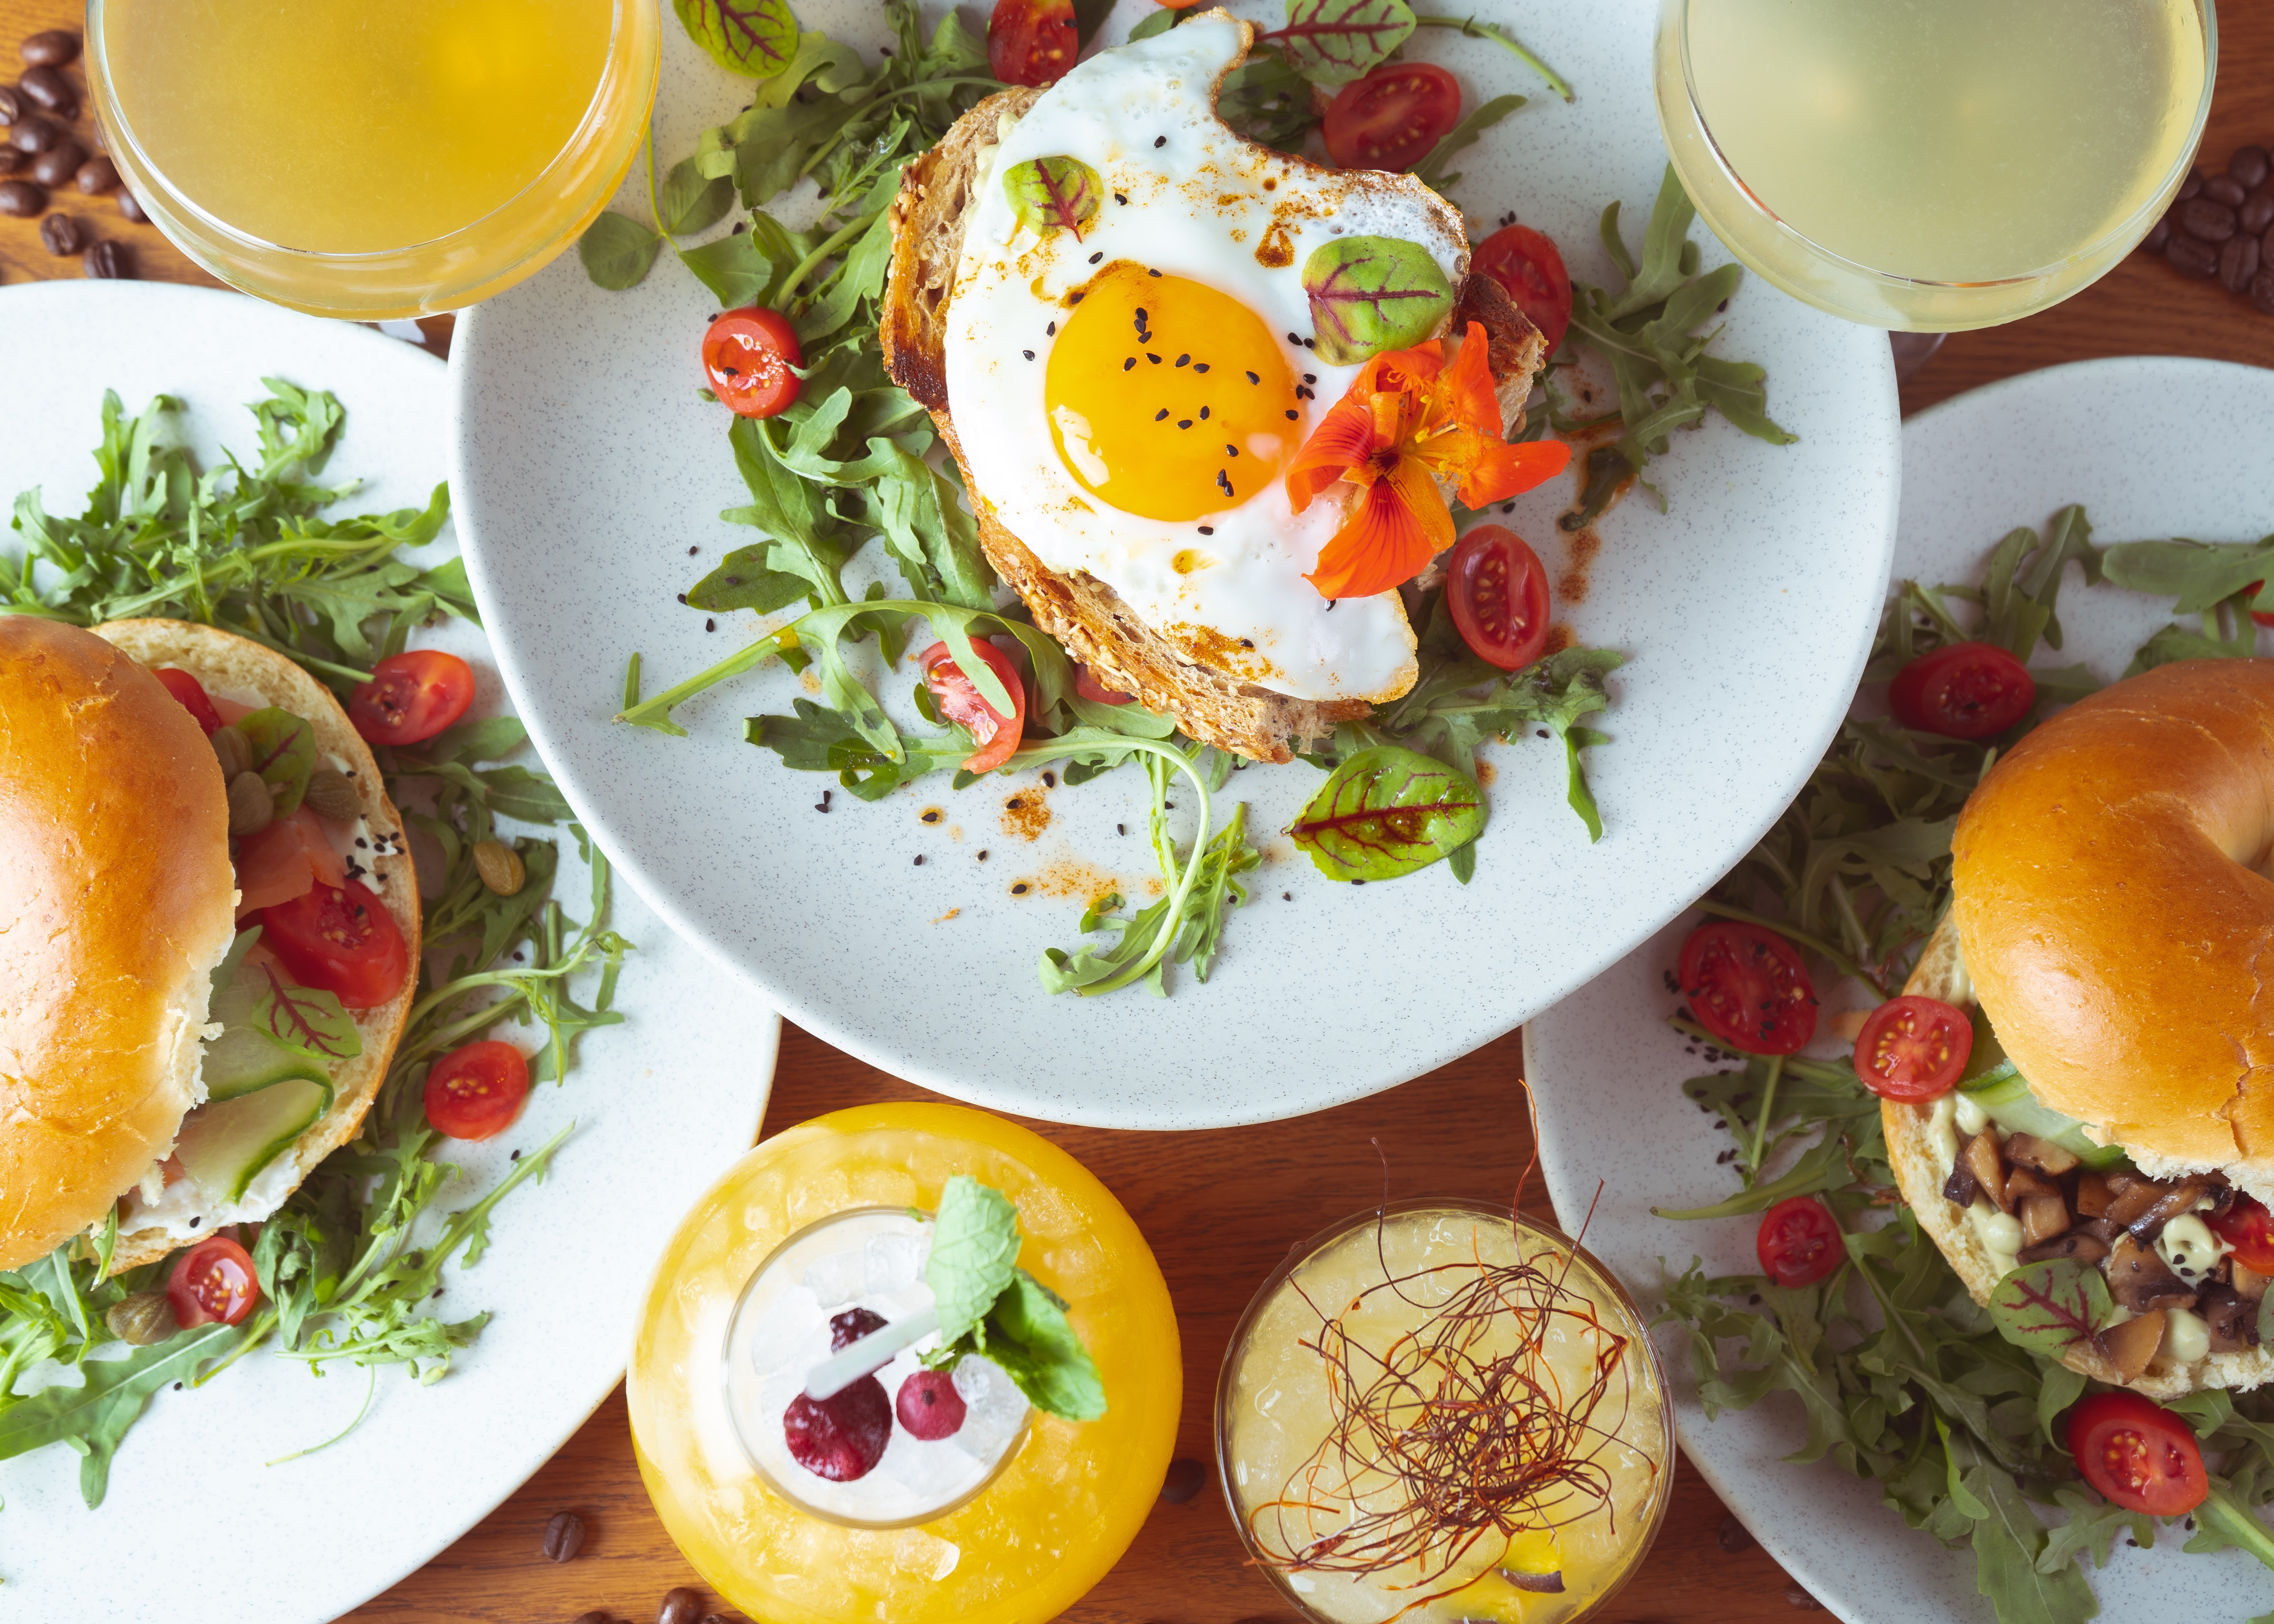 Make the Most of the Long Weekend with Sunday Brunch